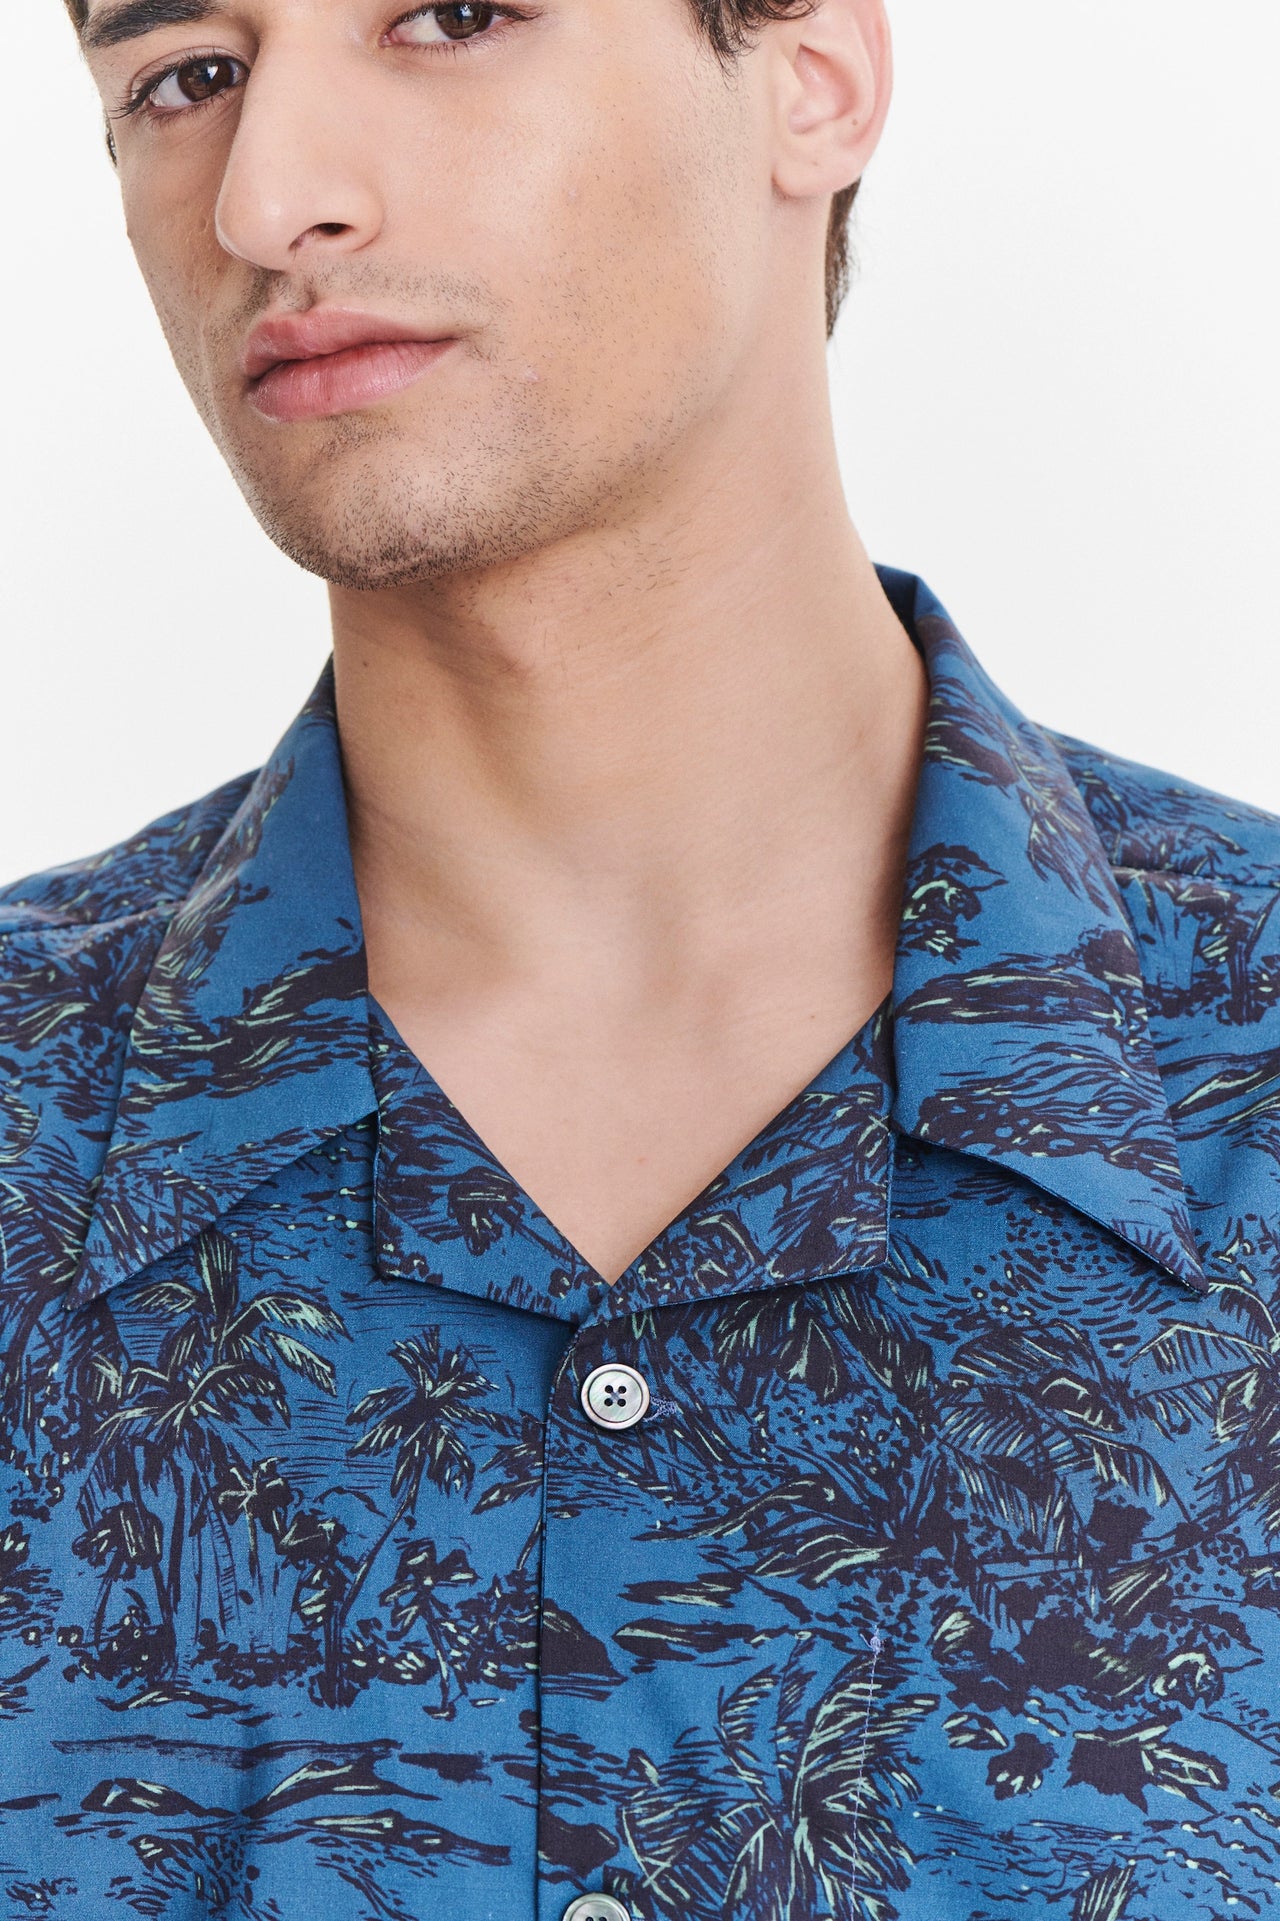 Short Sleeve Cuban Collar Shirt in a Blue Printed Palm Design Italian Cotton and Lyocell